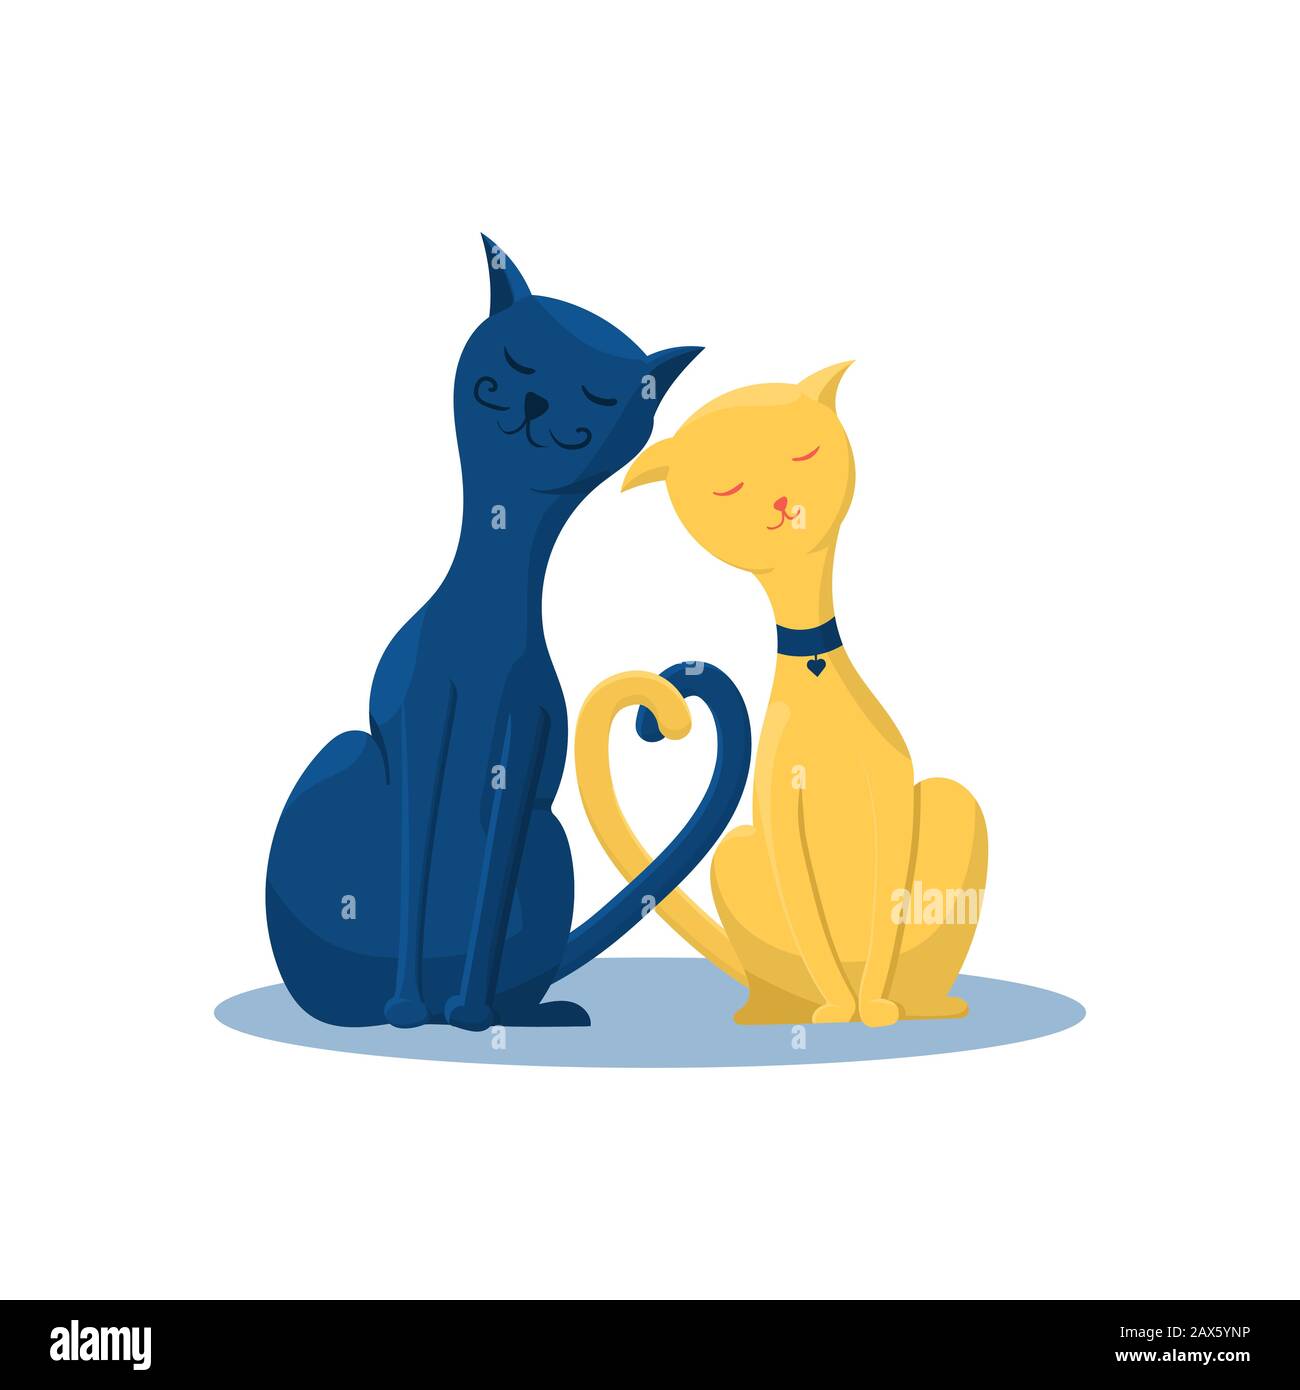 7,225 Two Cats Love Vector Images, Stock Photos, 3D objects, & Vectors